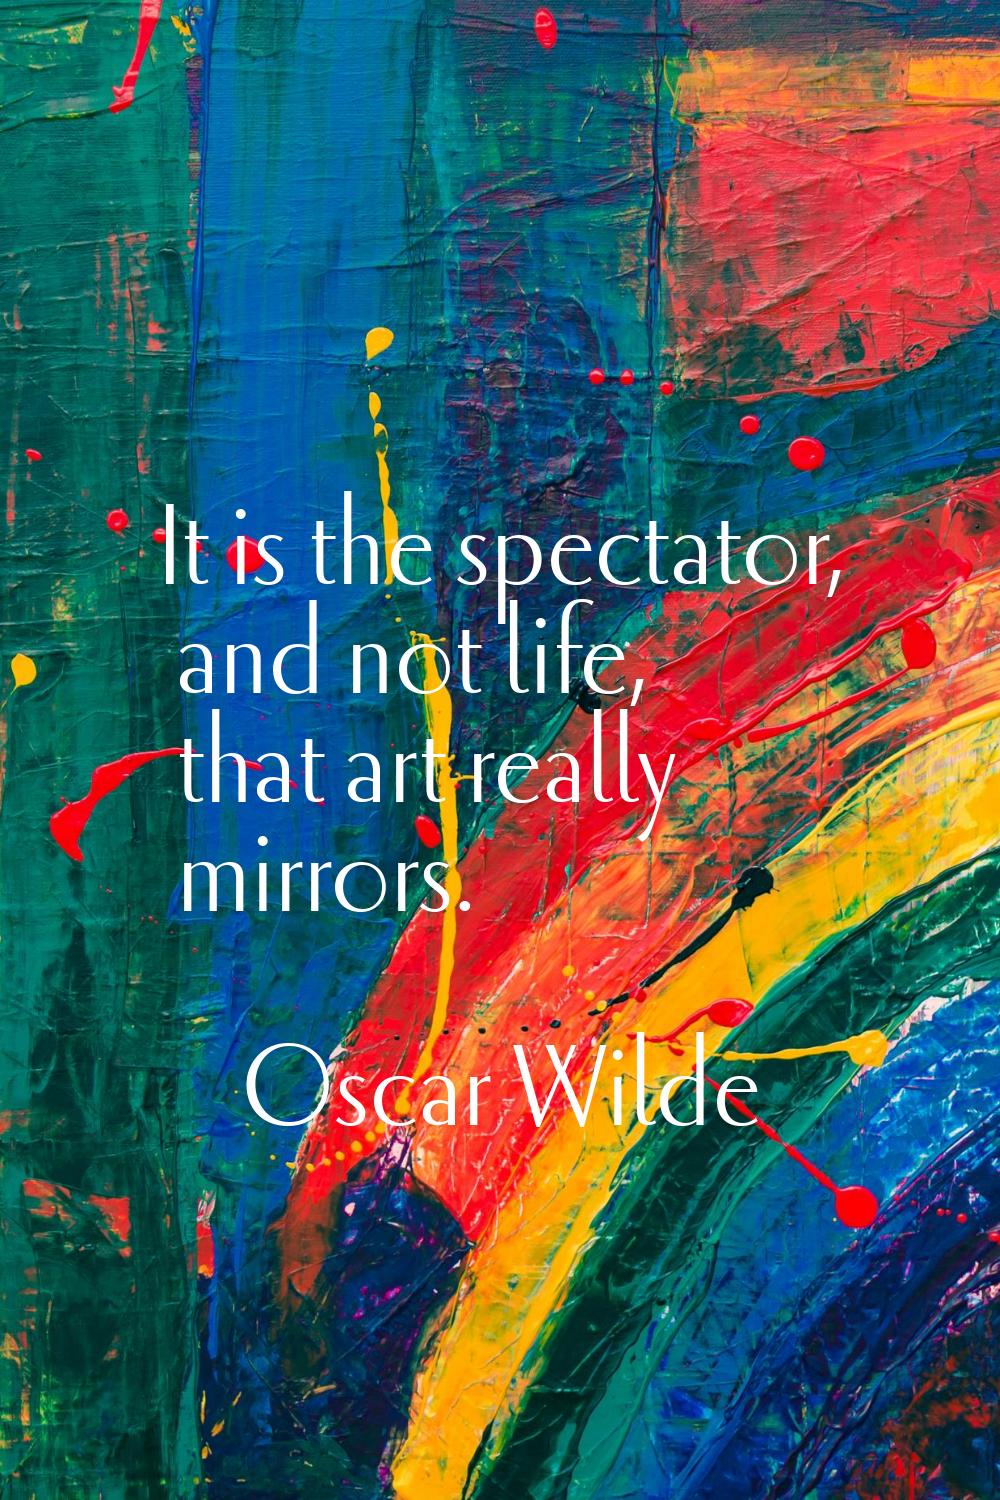 It is the spectator, and not life, that art really mirrors.